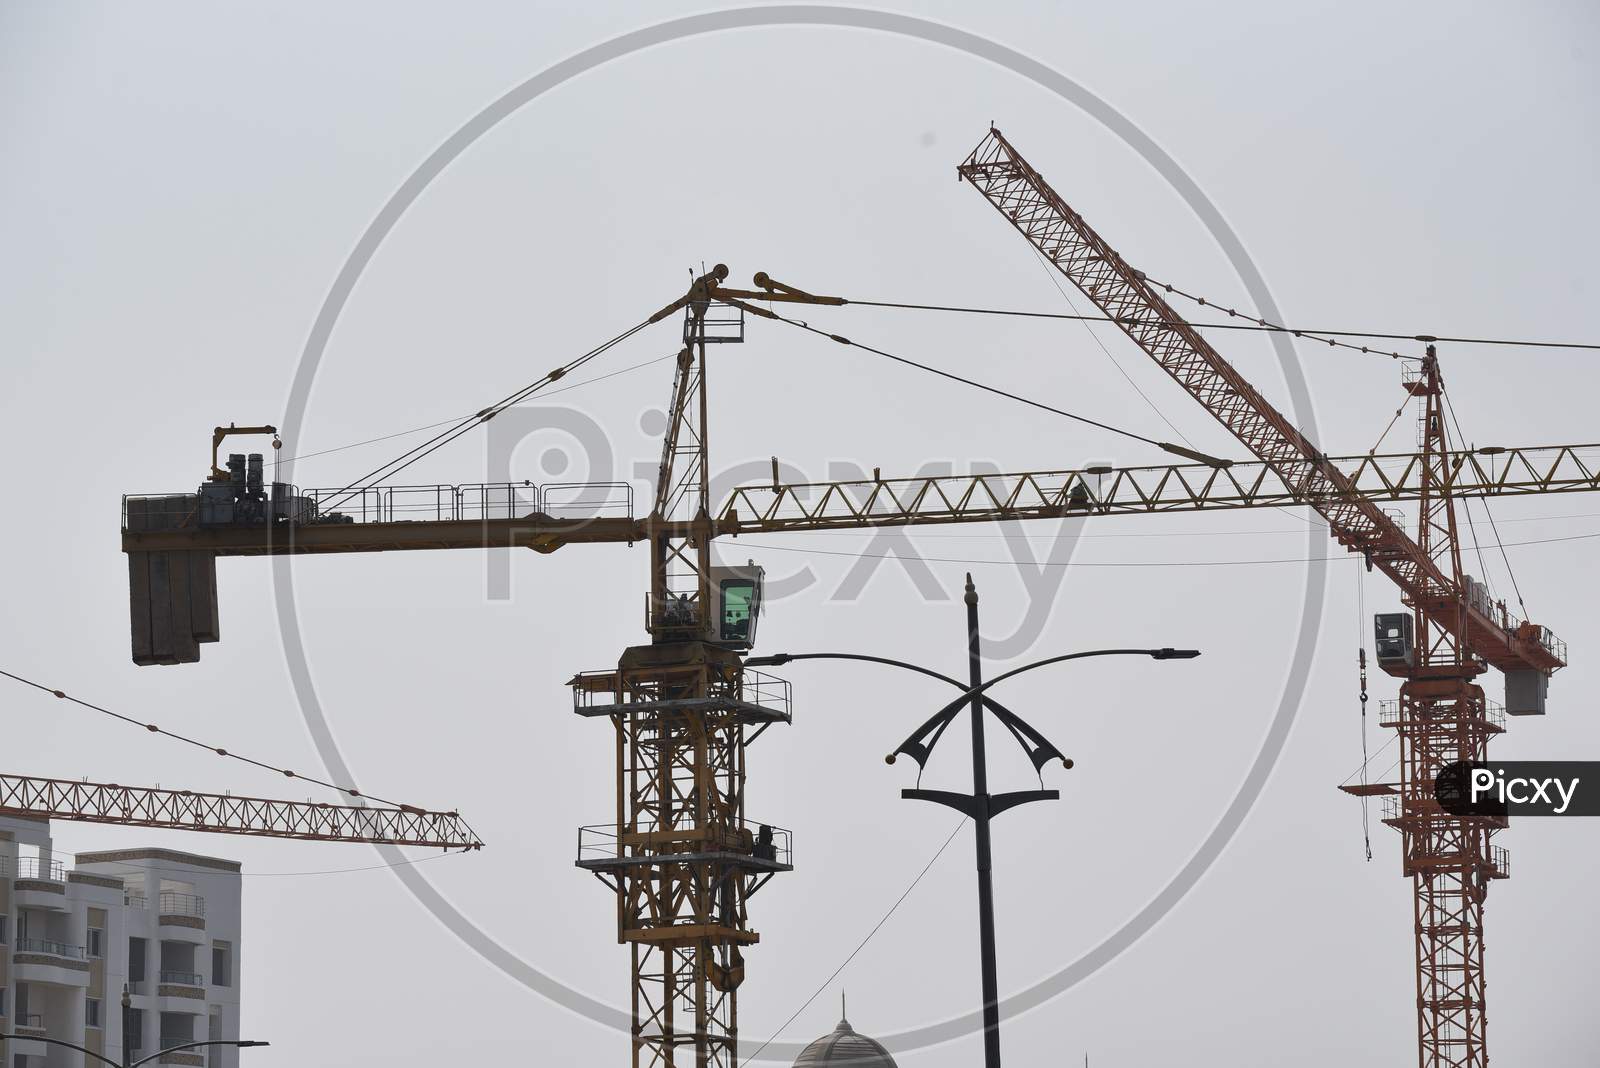 Huge tower cranes at a construction site